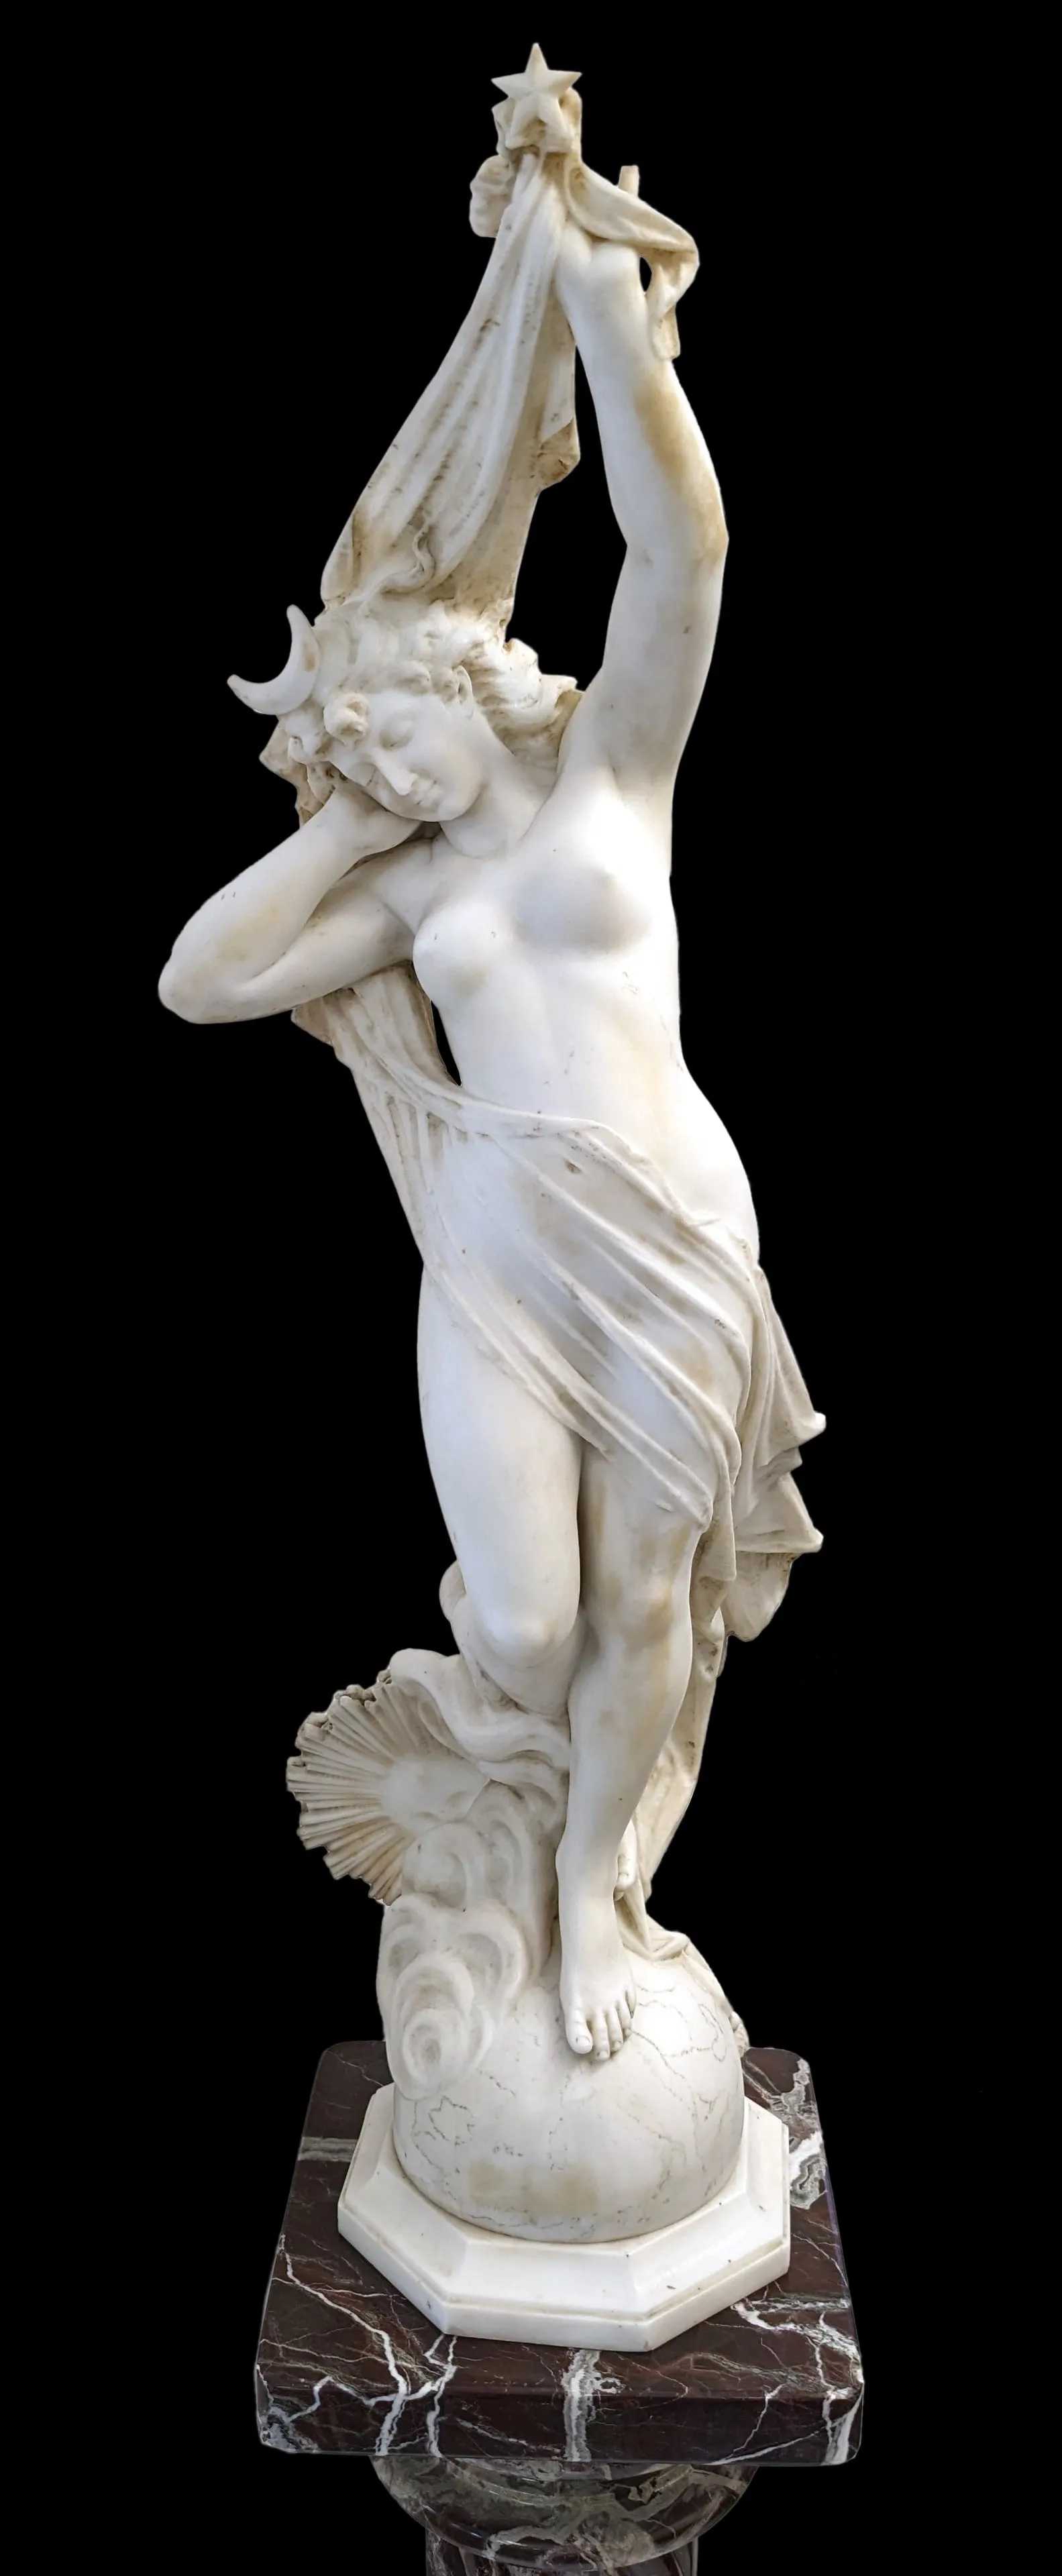 Ferdinando Vicchi, large marble sculpture of an allegorical figure, estimated at $9,000-$12,000 at Tremont Auctions.